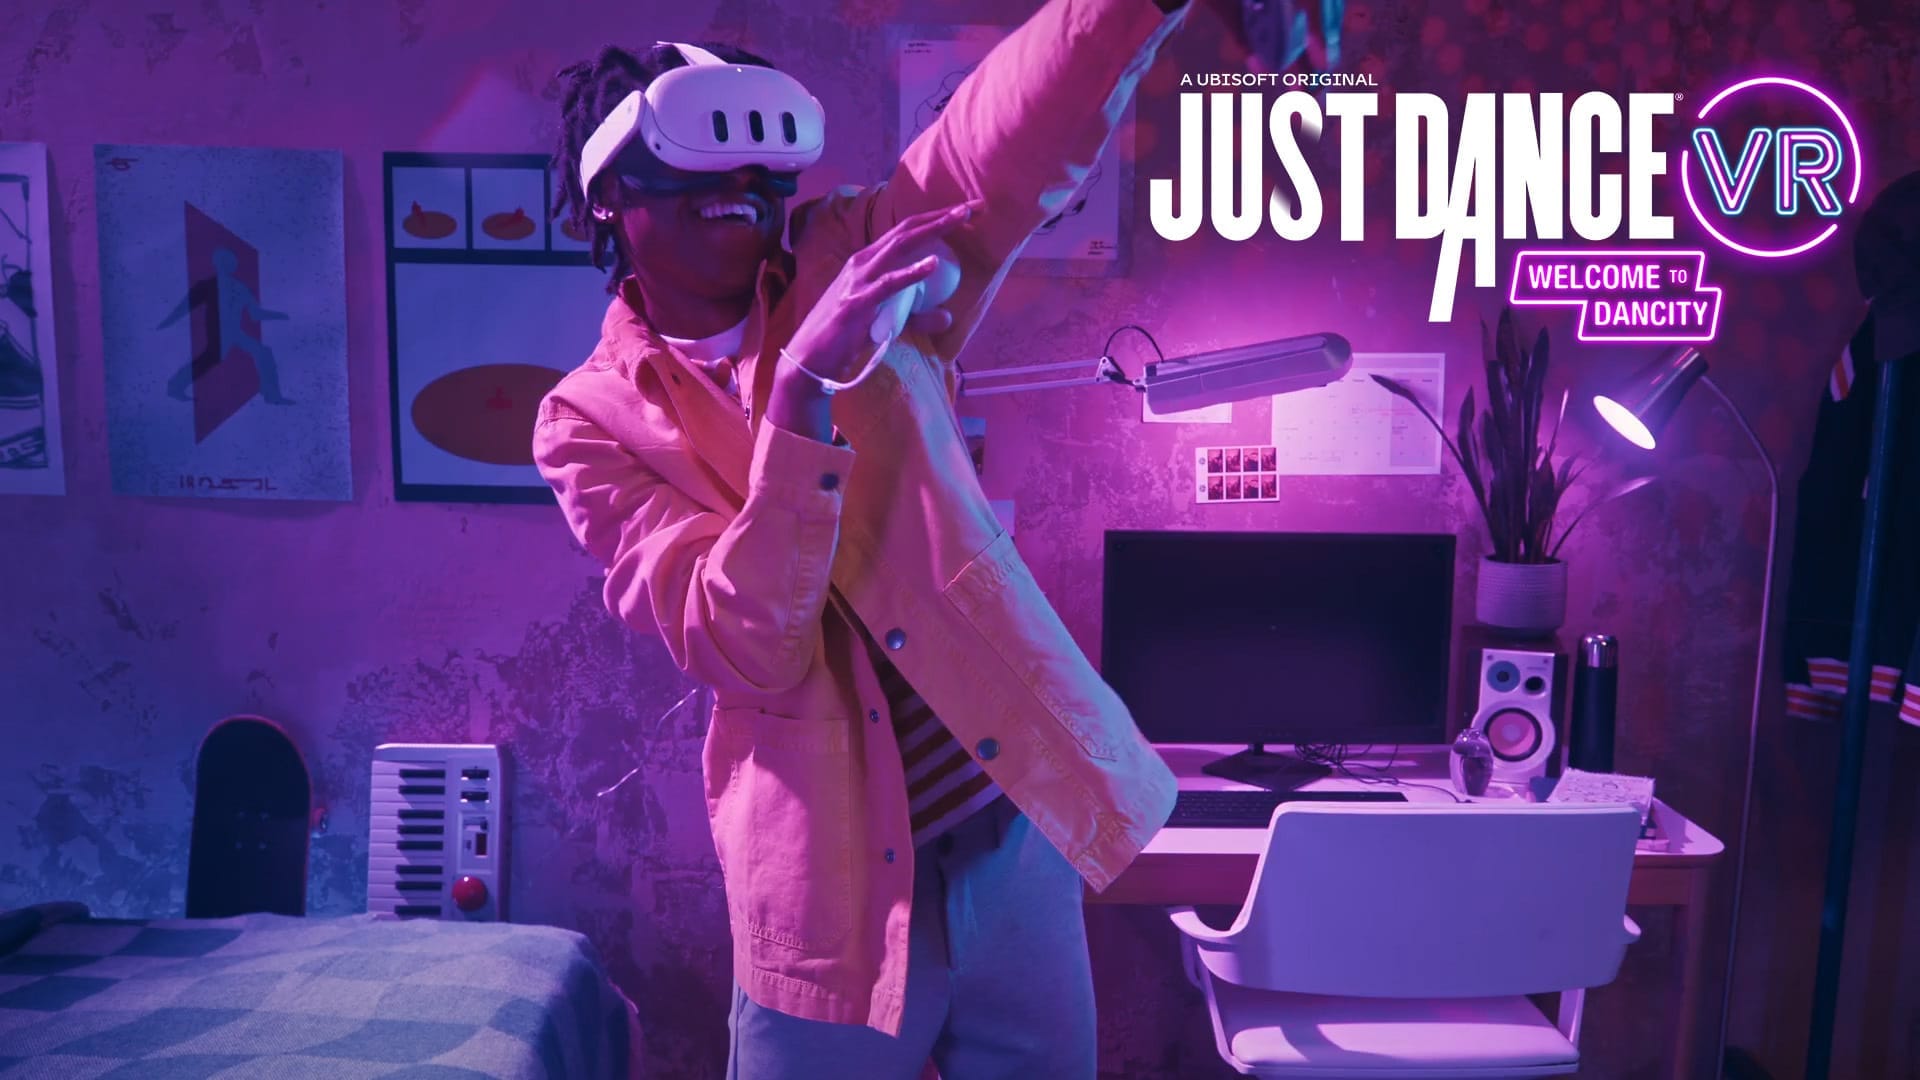 Upcoming VR Games - Just Dance VR